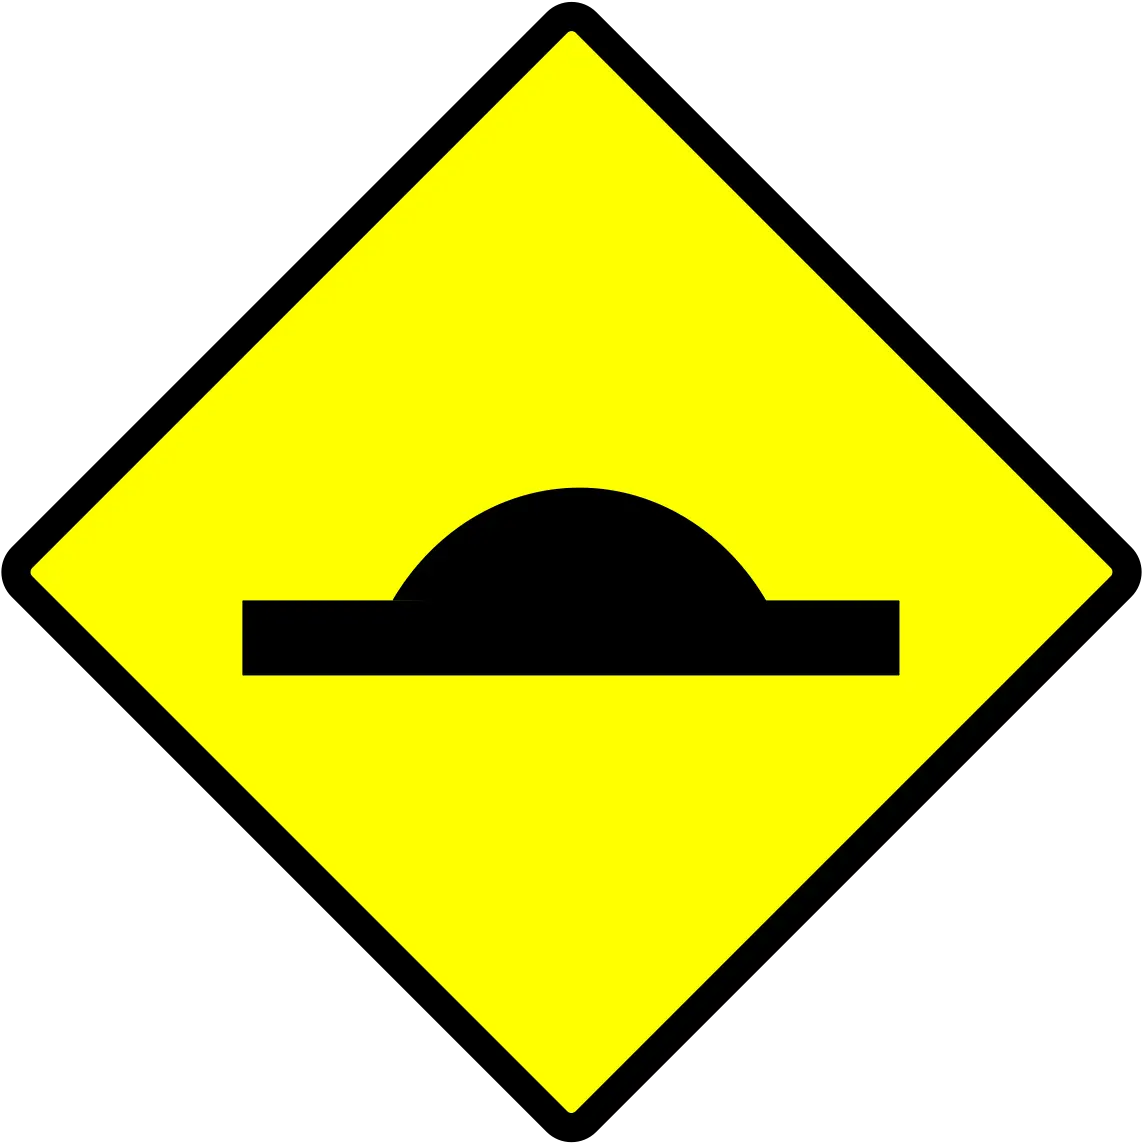 Fileindonesia New Road Sign 3fpng Wikimedia Commons Warning Sign Traffic Rules Hazard Sign Png